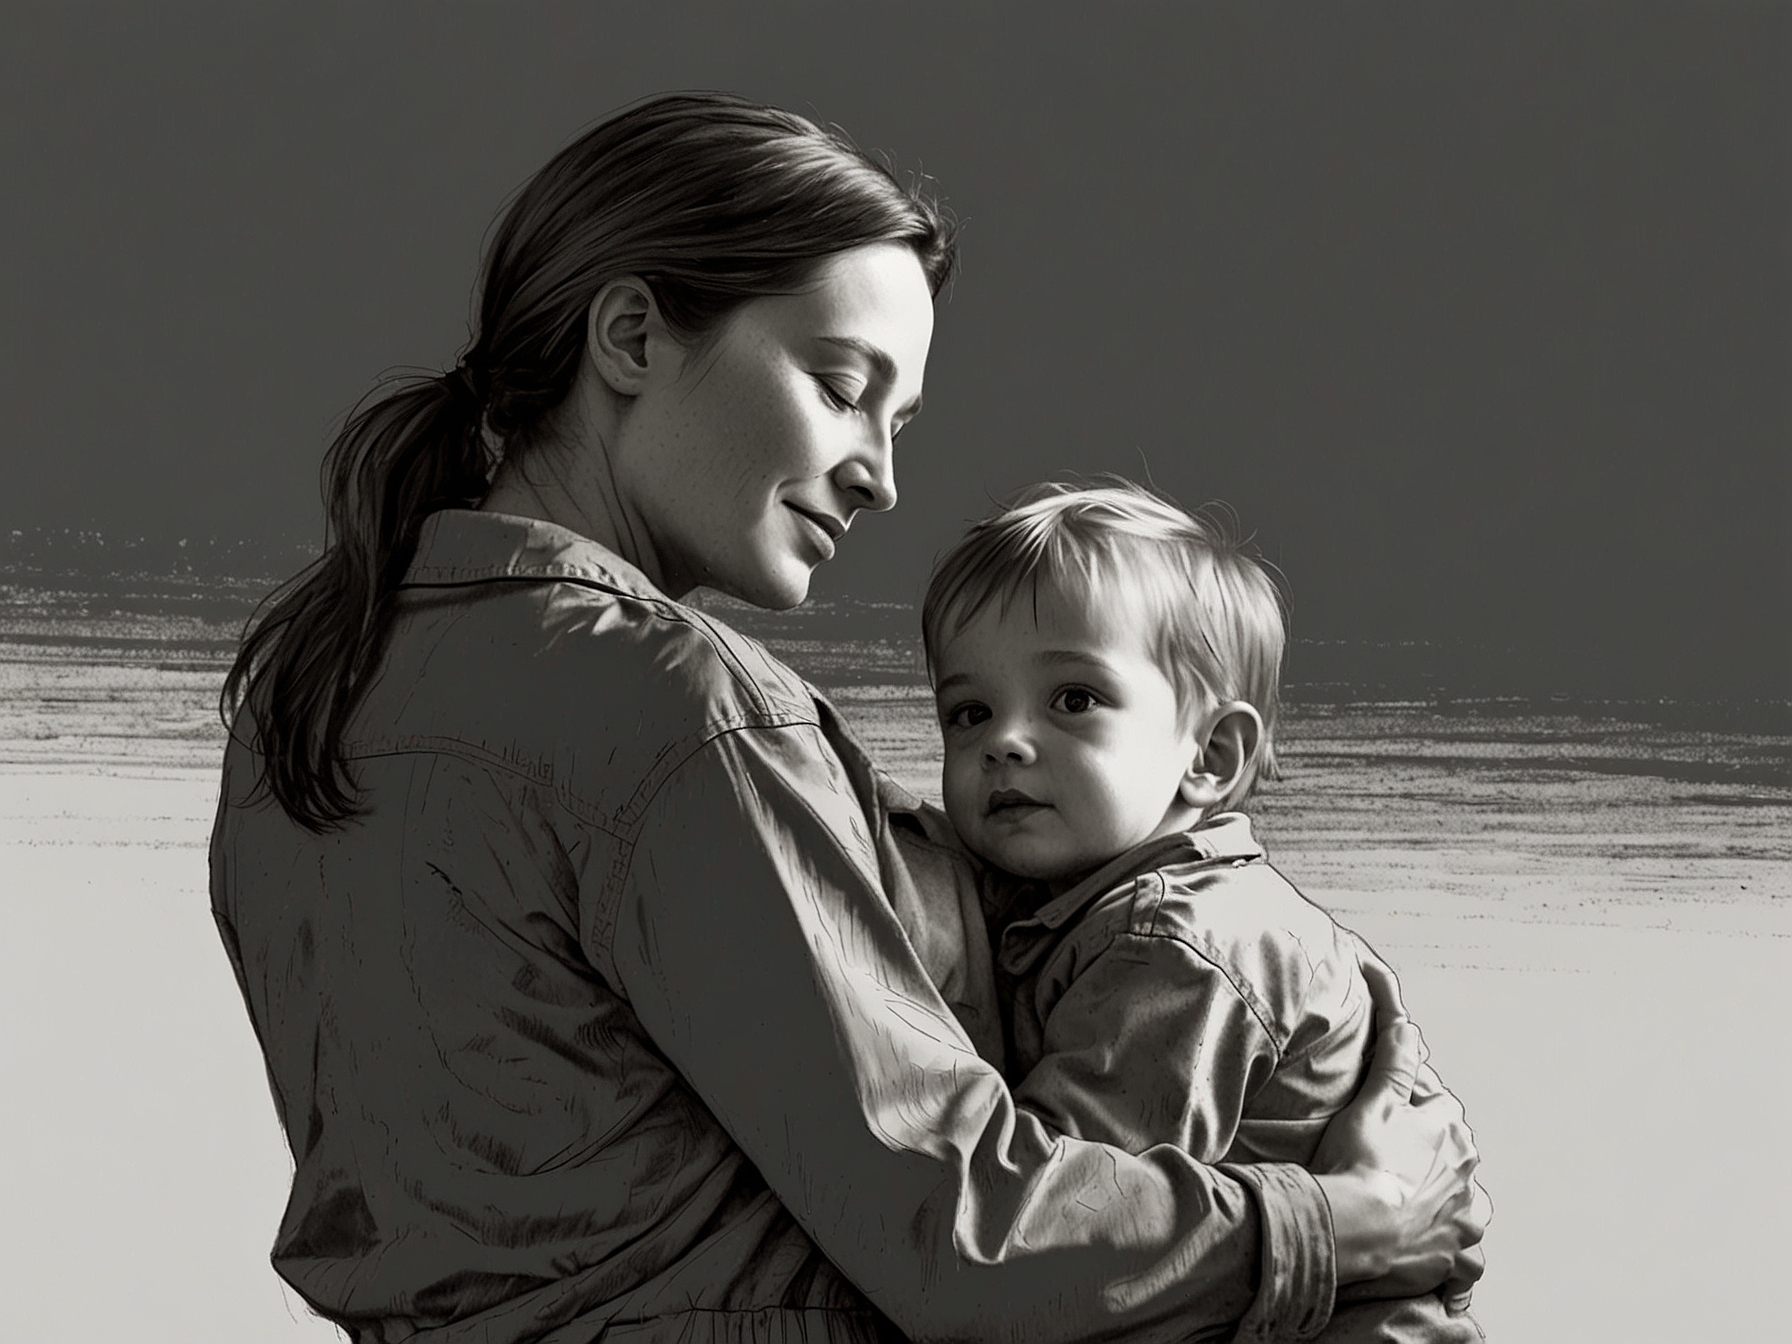 A human mother with her adult child in an affectionate moment, symbolizing prolonged maternal support that contributes to improved mental health and extended lifespan.